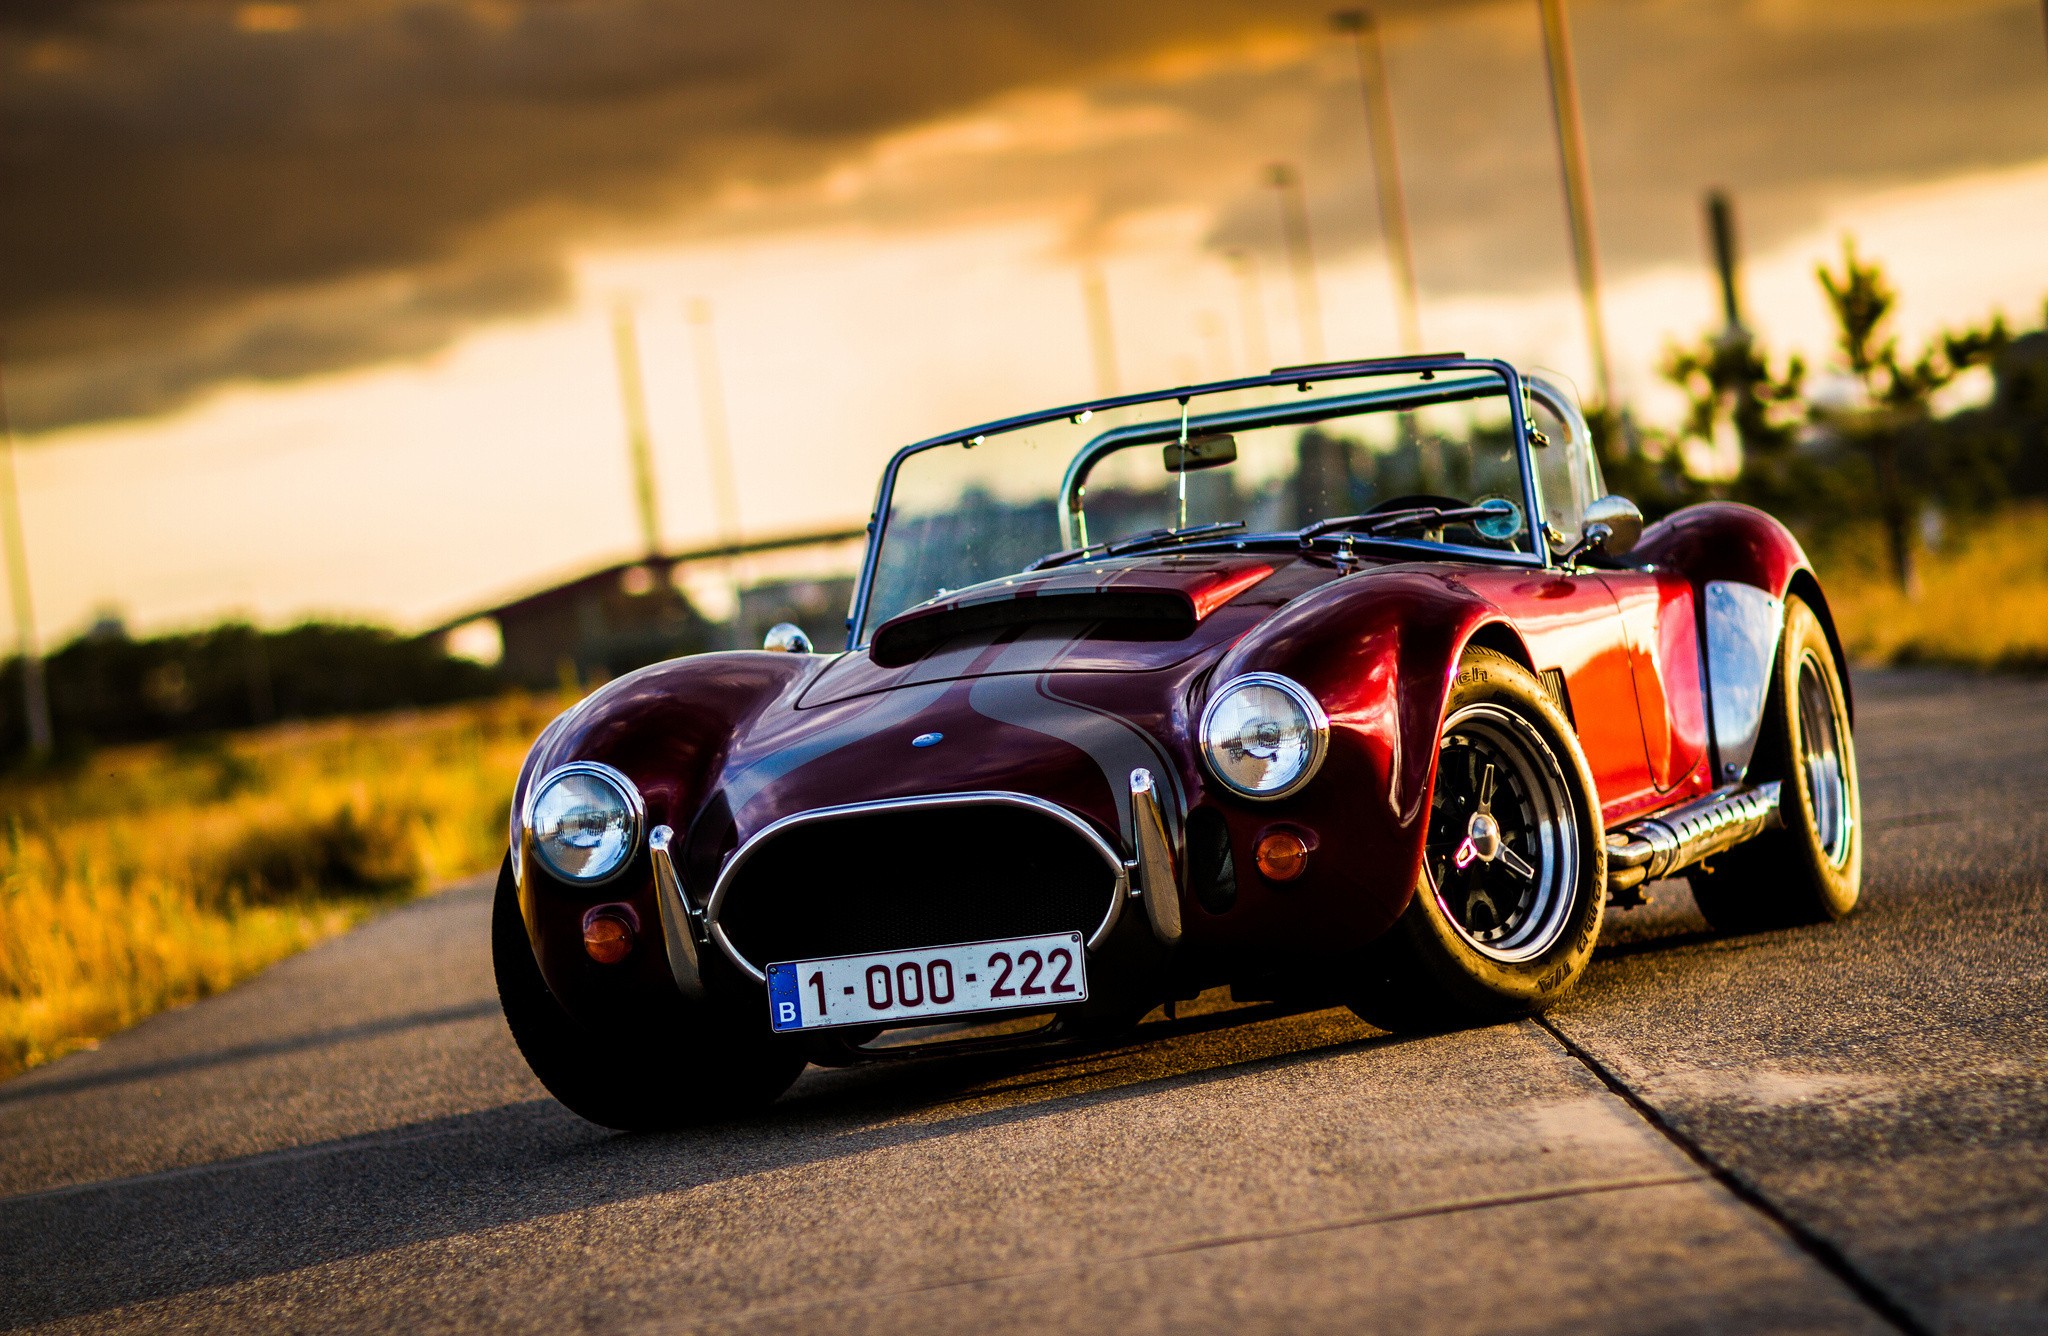 General 2048x1336 Shelby car convertible sunlight shadow Shelby Cobra red cars oldtimers numbers vehicle Ford